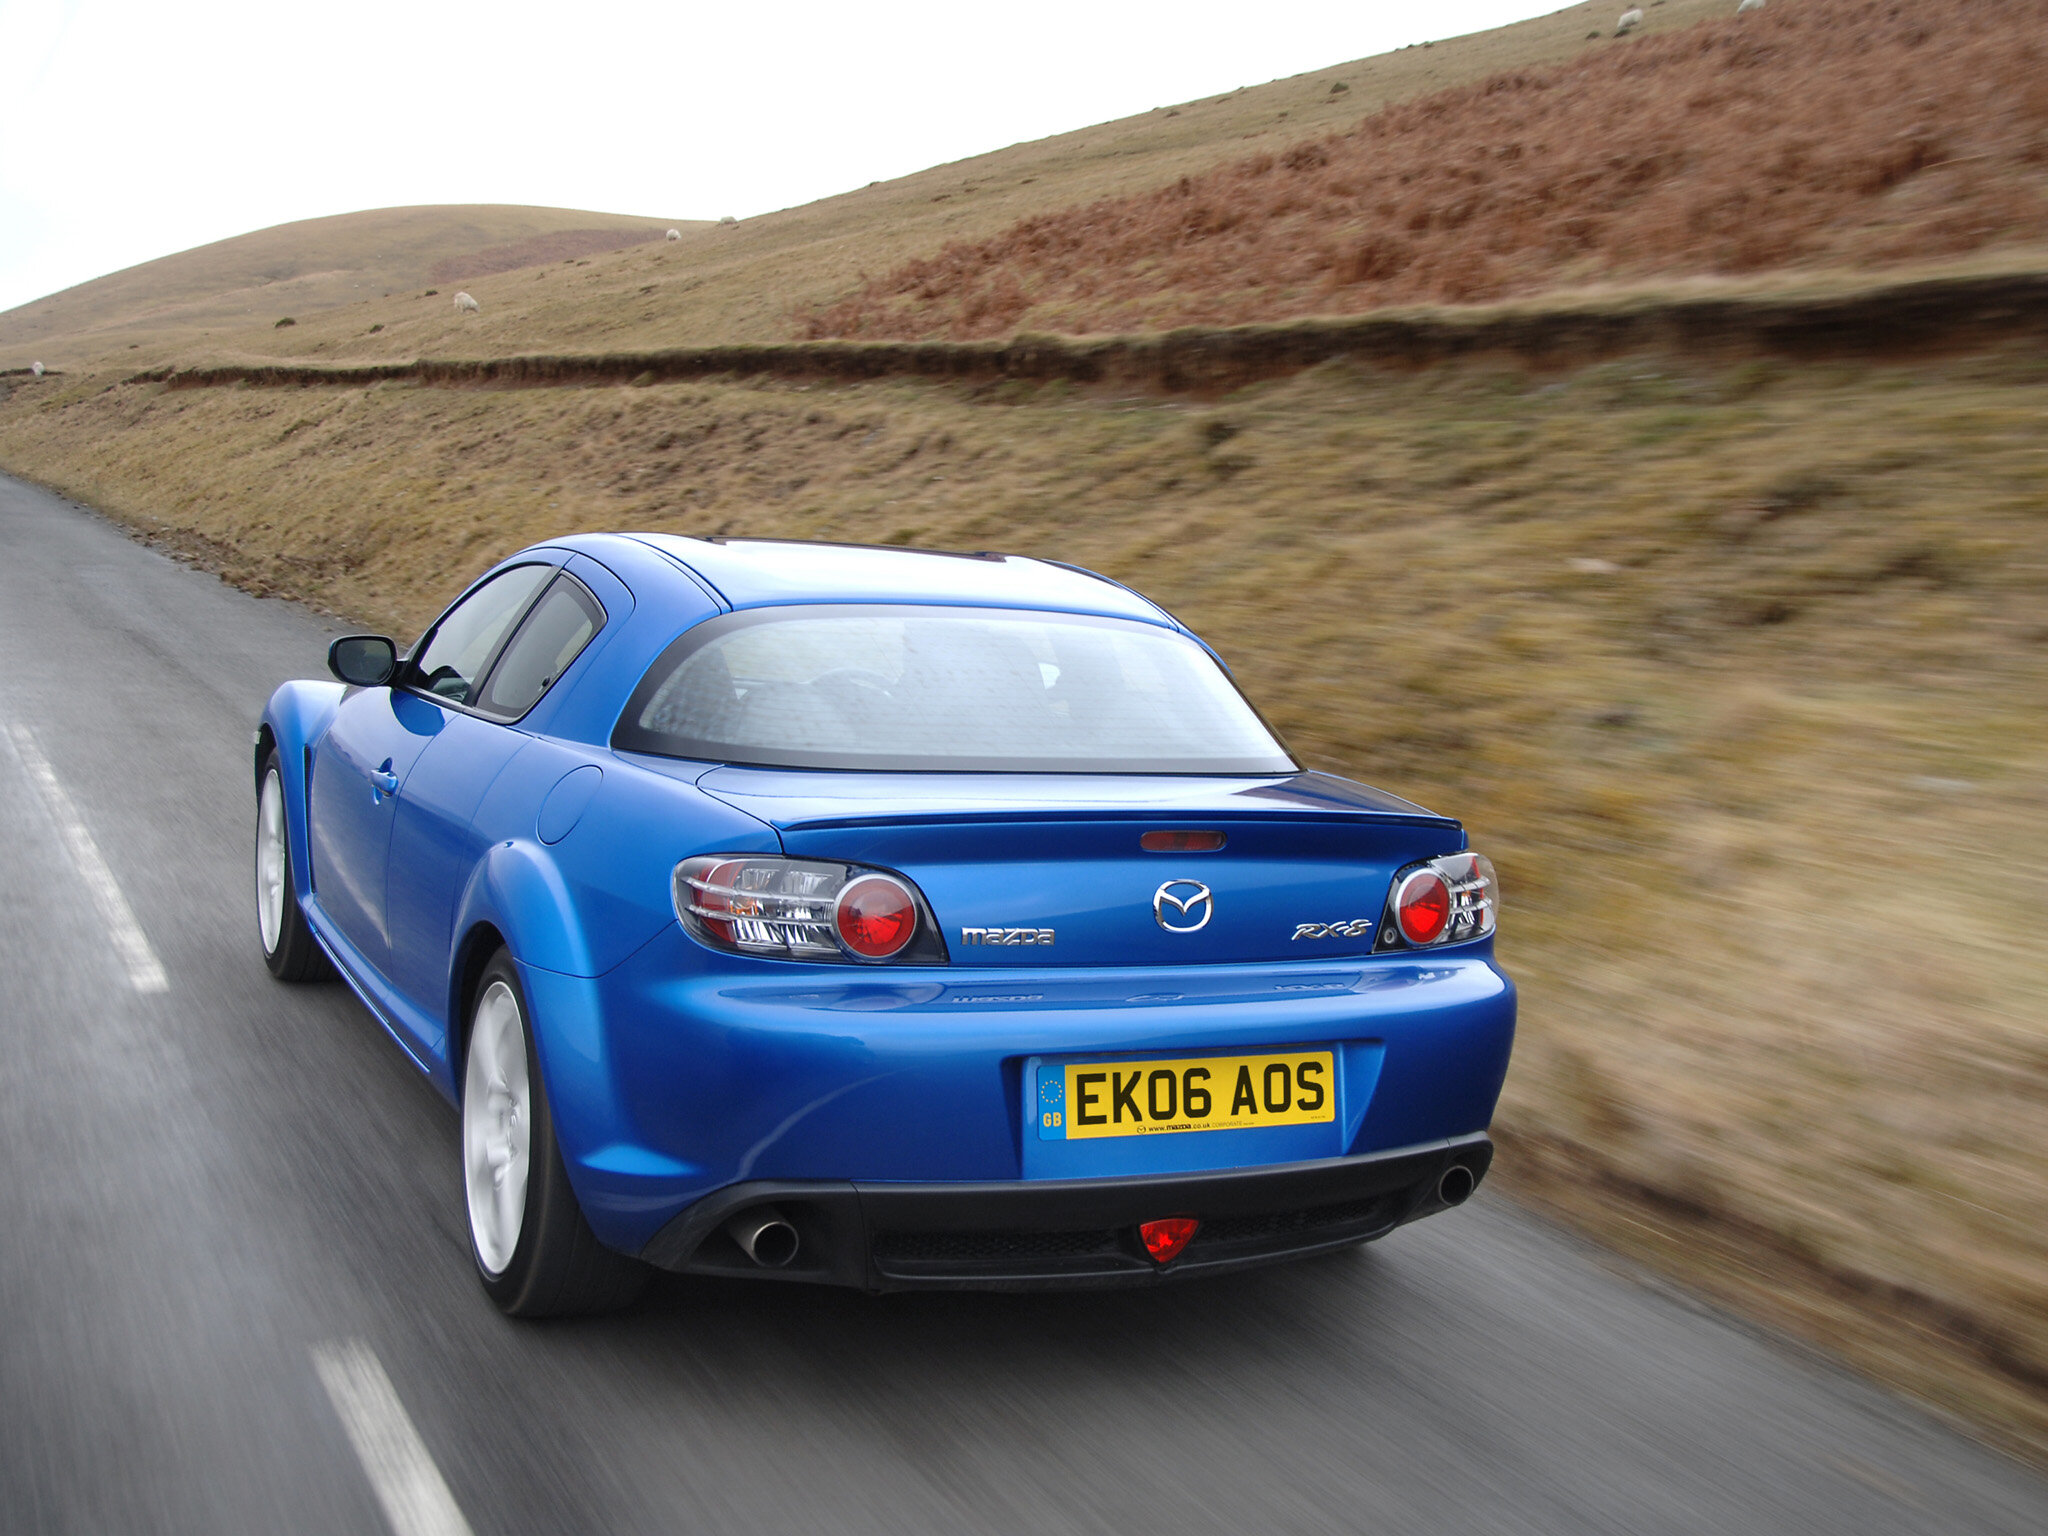 The view lesser cars will get of a hard-driven Mazda RX-8